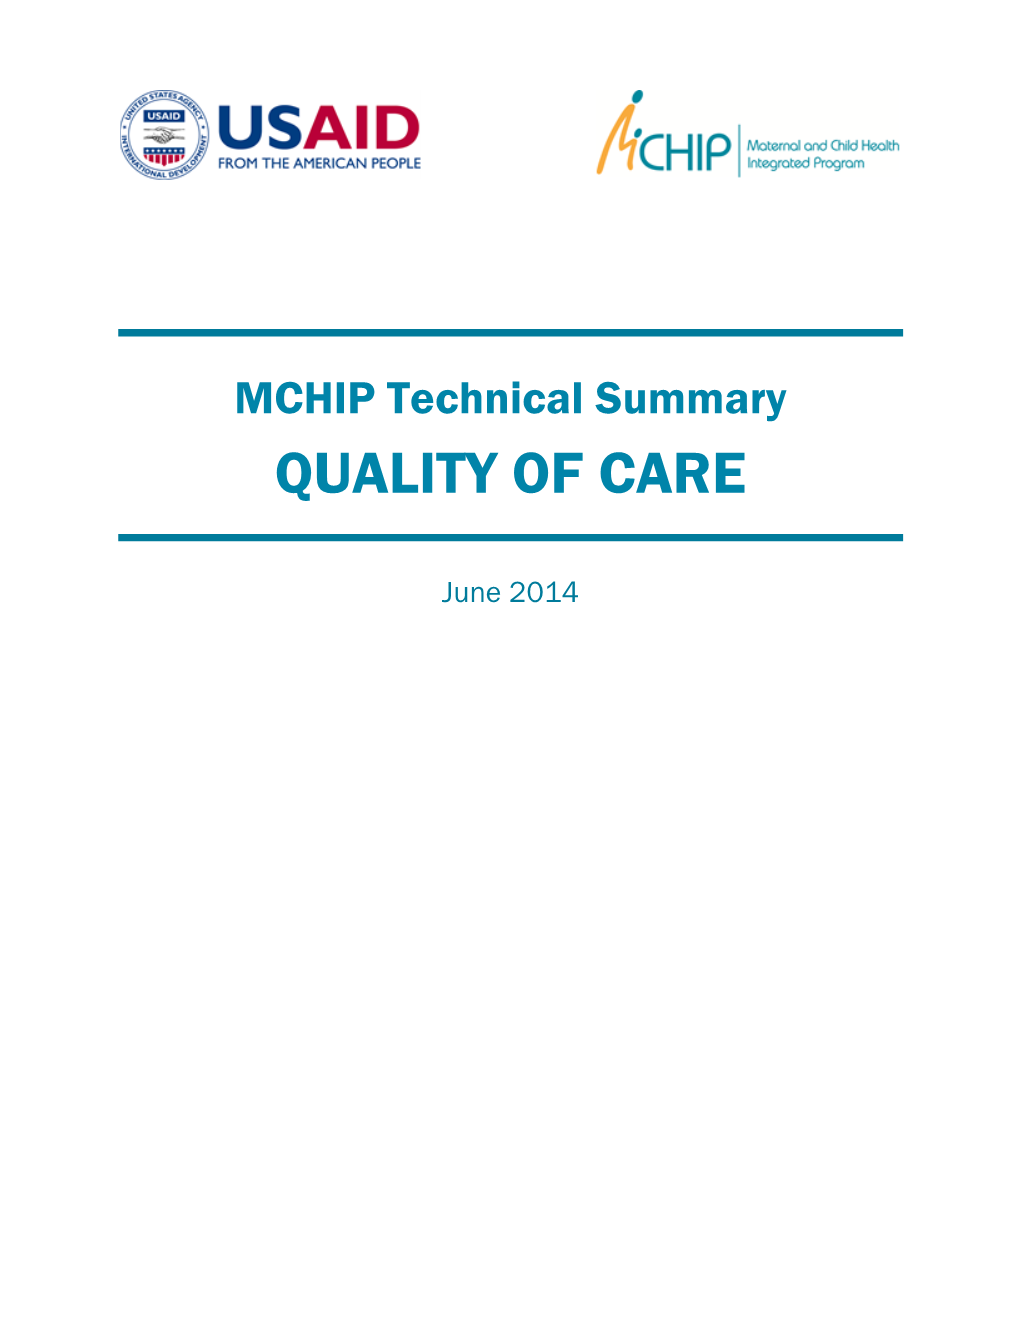 MCHIP Technical Summary QUALITY of CARE